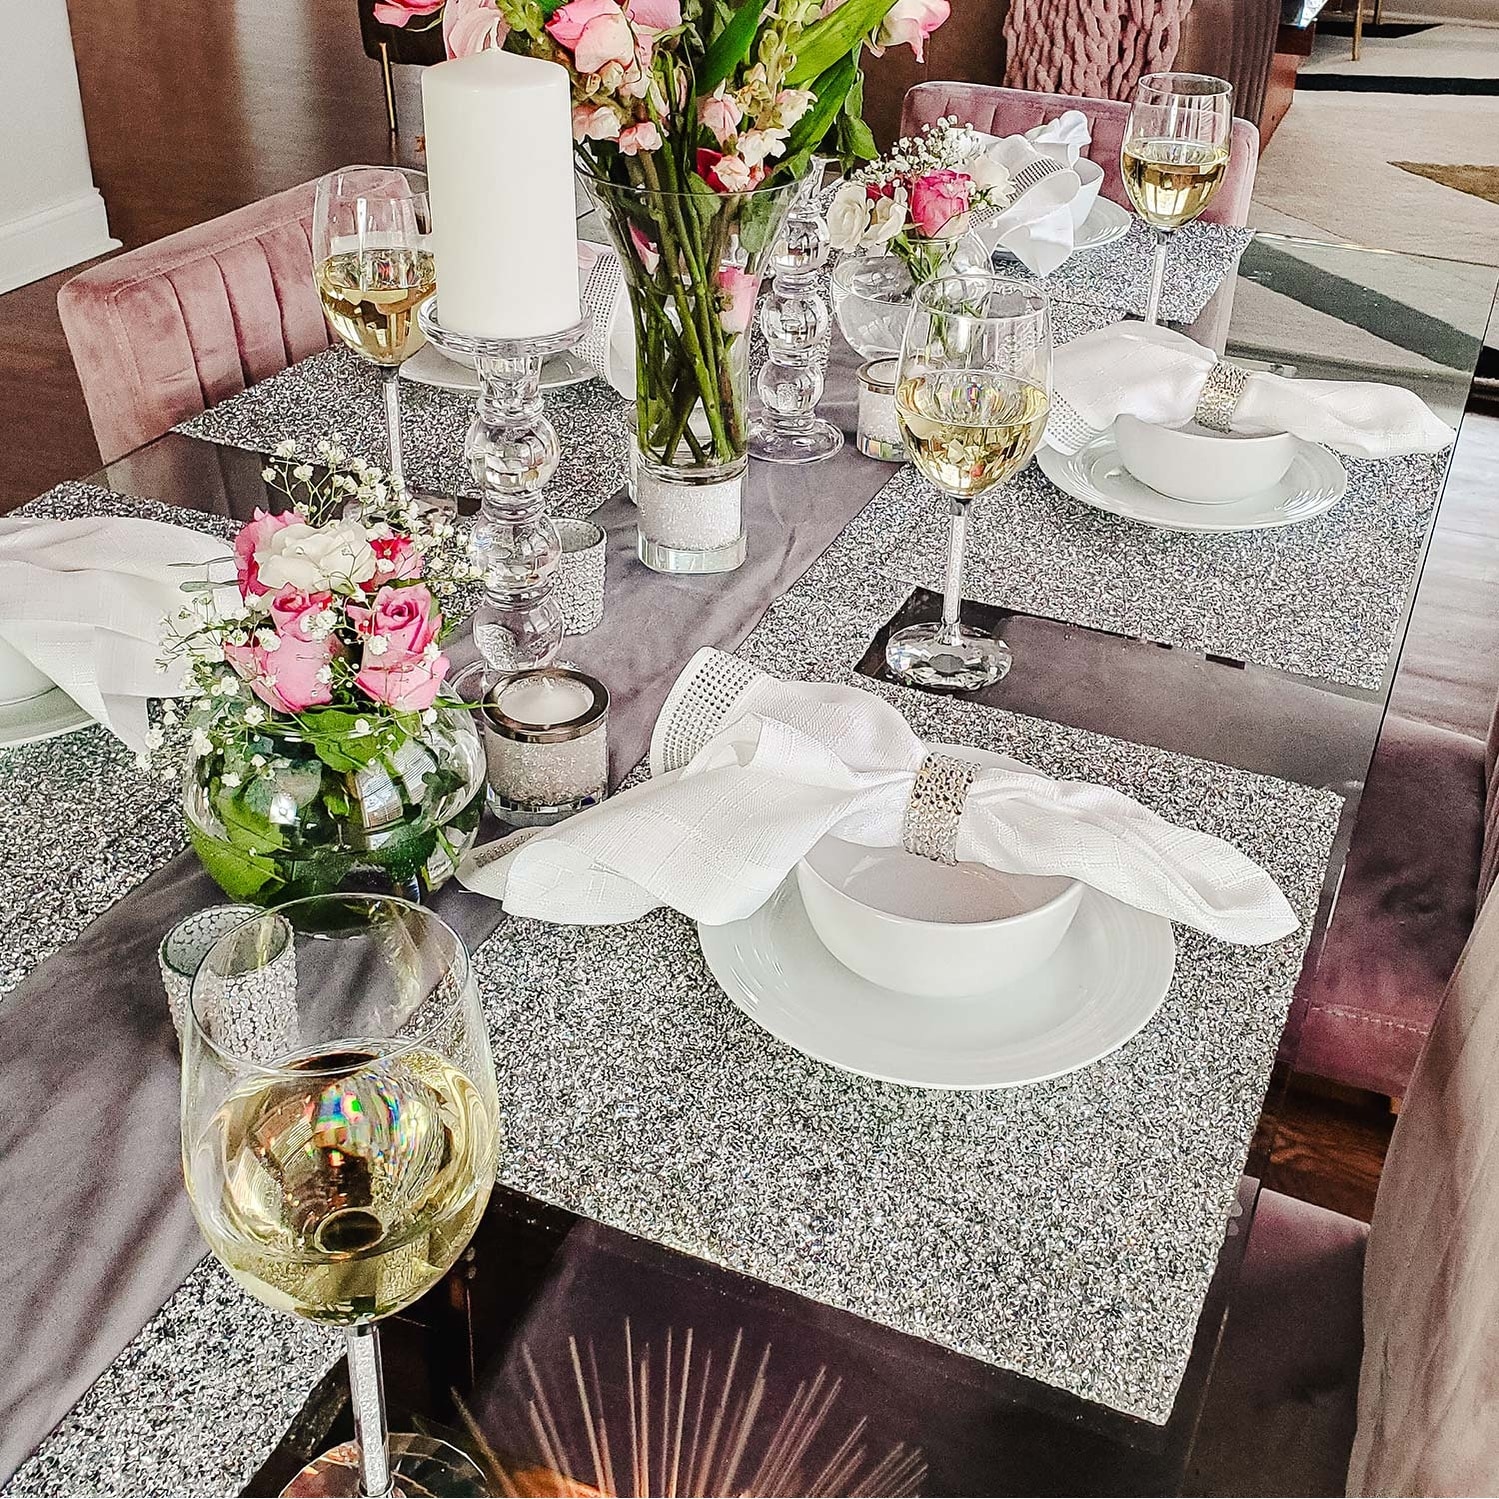 https://ak1.ostkcdn.com/images/products/is/images/direct/41b1c03cbcc6b66eea6e0182487ff05bded1d43f/Sparkles-Home-Luminous-Rectangle-Rhinestone-Placemat.jpg